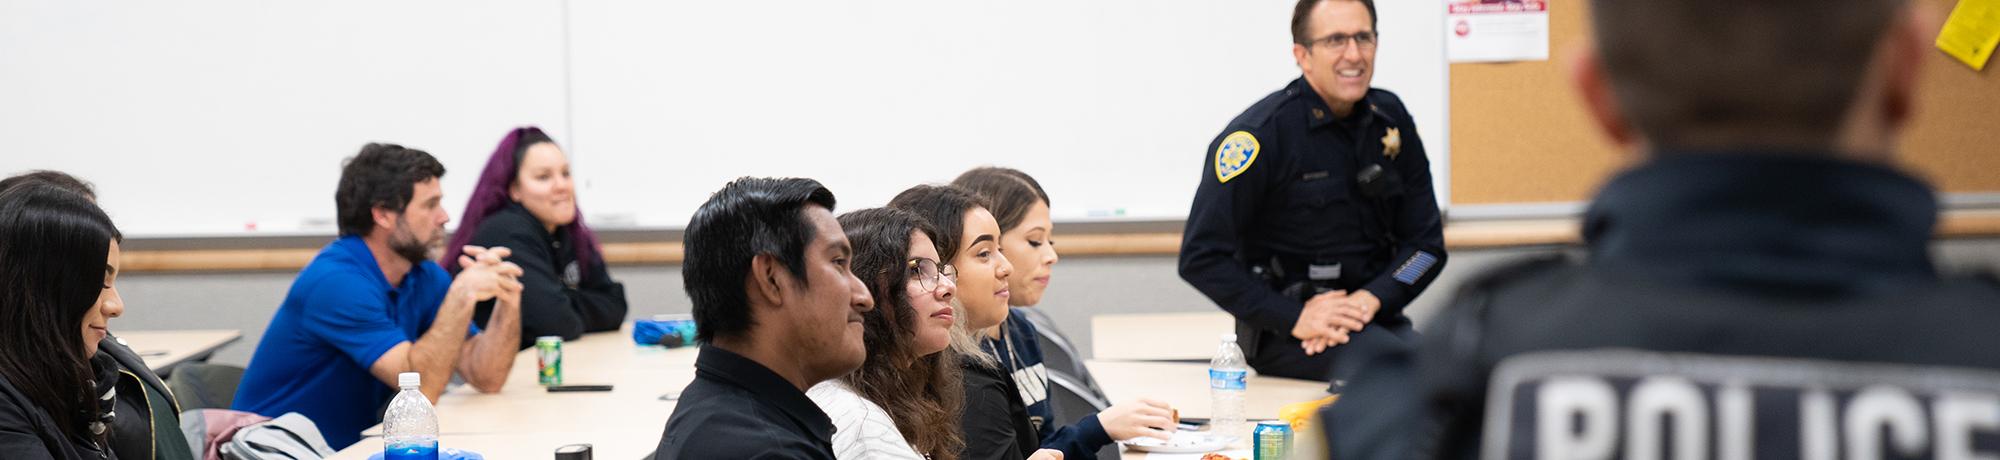 Police captain smiling with students listening in a classroom